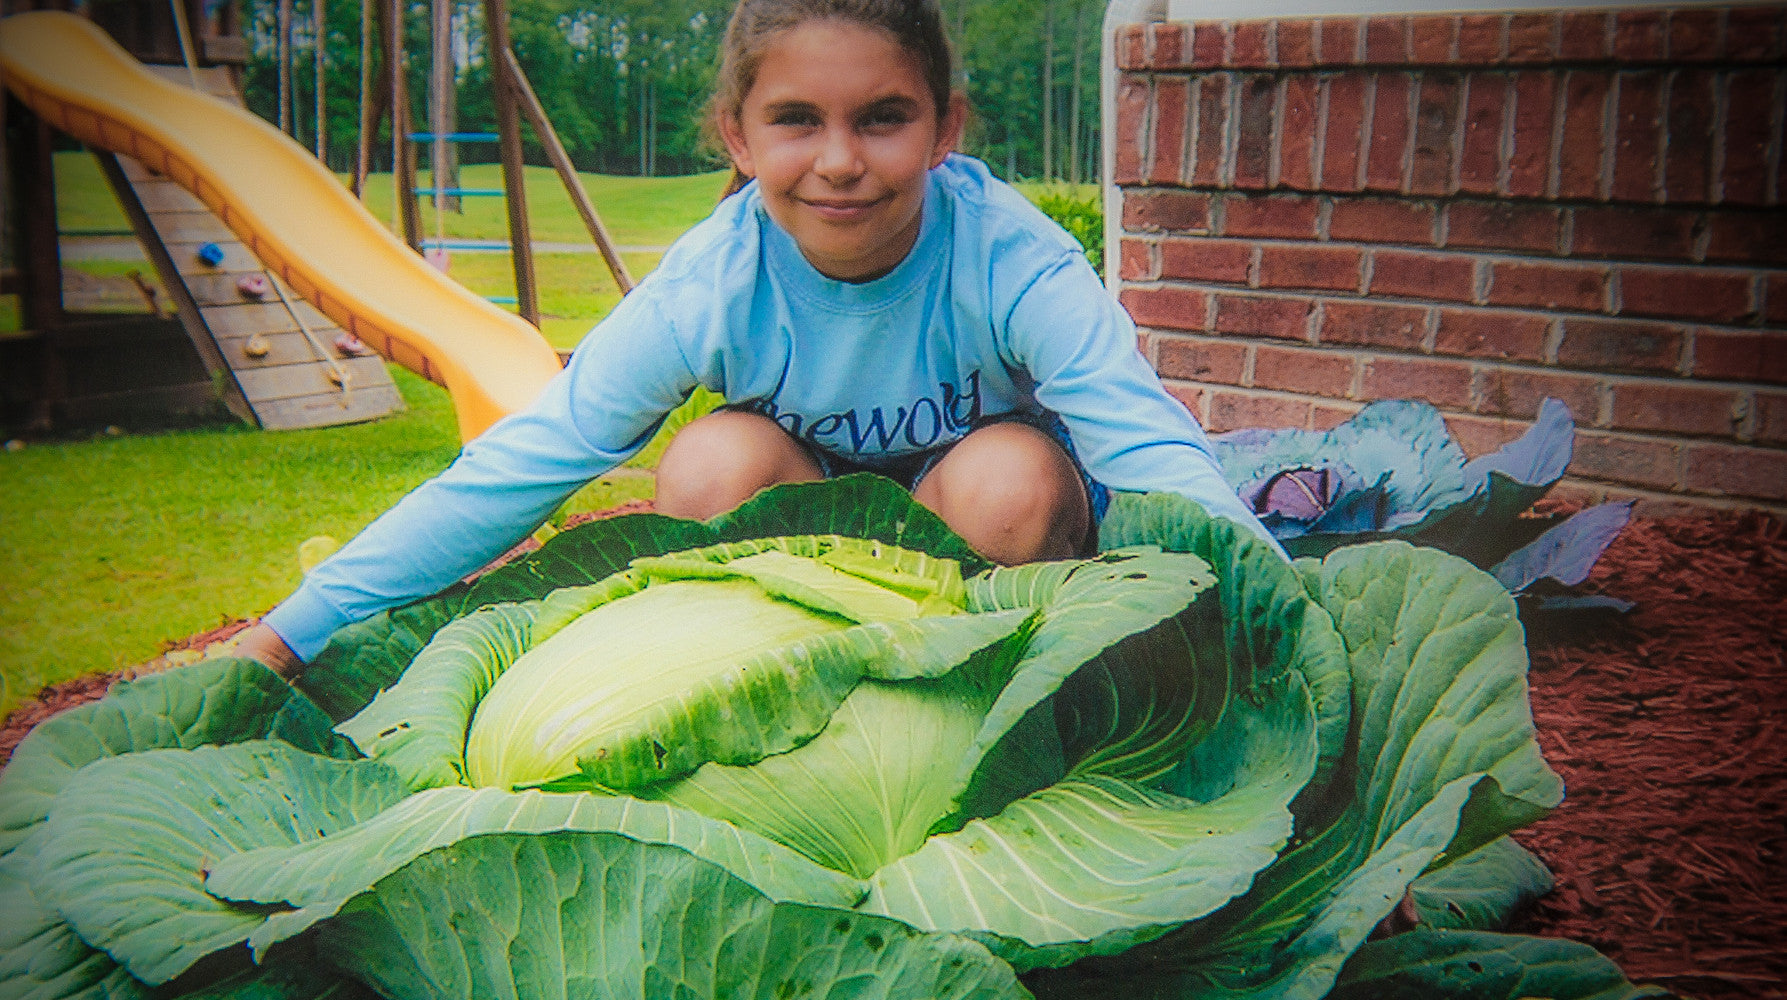 Katie Stagliano with her 40lb cabbage crop